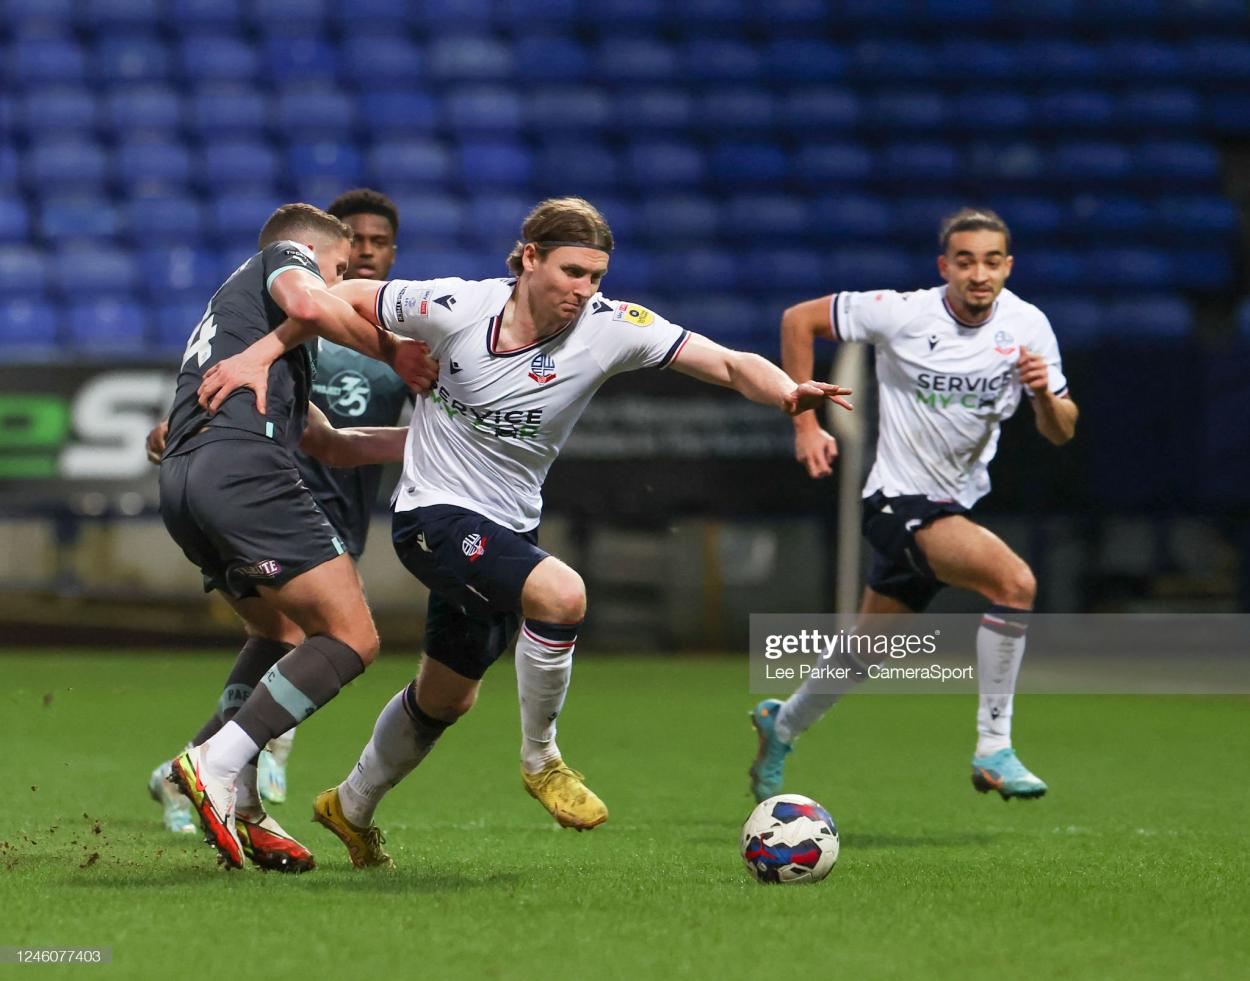 Bolton Wanderers' Jon Dadi Bodvarsson holds off the challenge from Plymouth Argyle's Jordan Houghton during the Sky Bet League One between Bolton Wanderers and Plymouth Argyle at University of Bolton Stadium on January 7, 2023 in Bolton, United Kingdom. (Photo by Lee Parker - CameraSport via Getty Images)